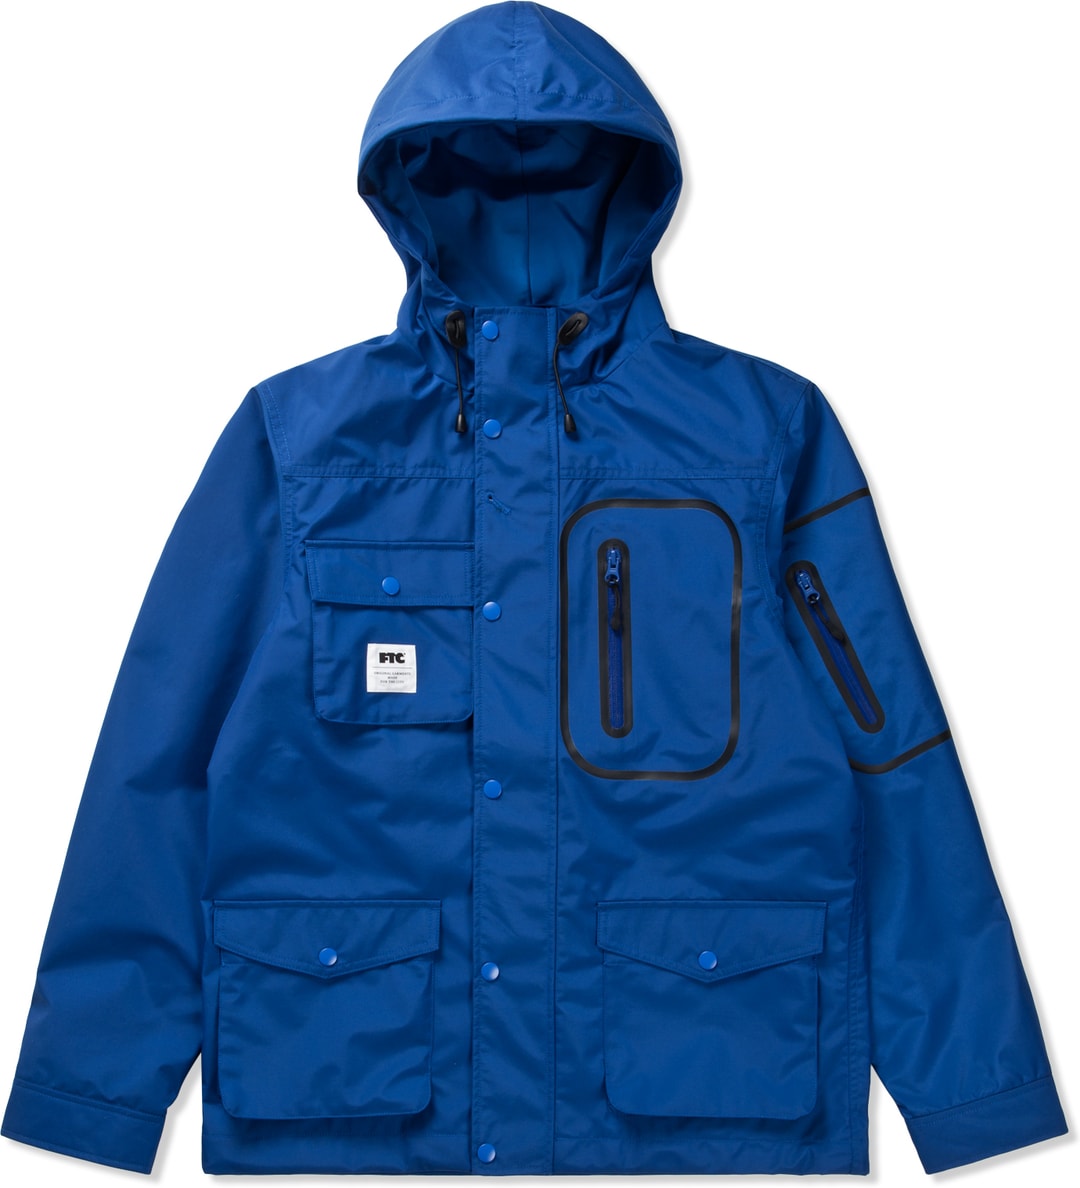 FTC - Blue Waterproof 3L MT Jacket | HBX - Globally Curated Fashion and ...